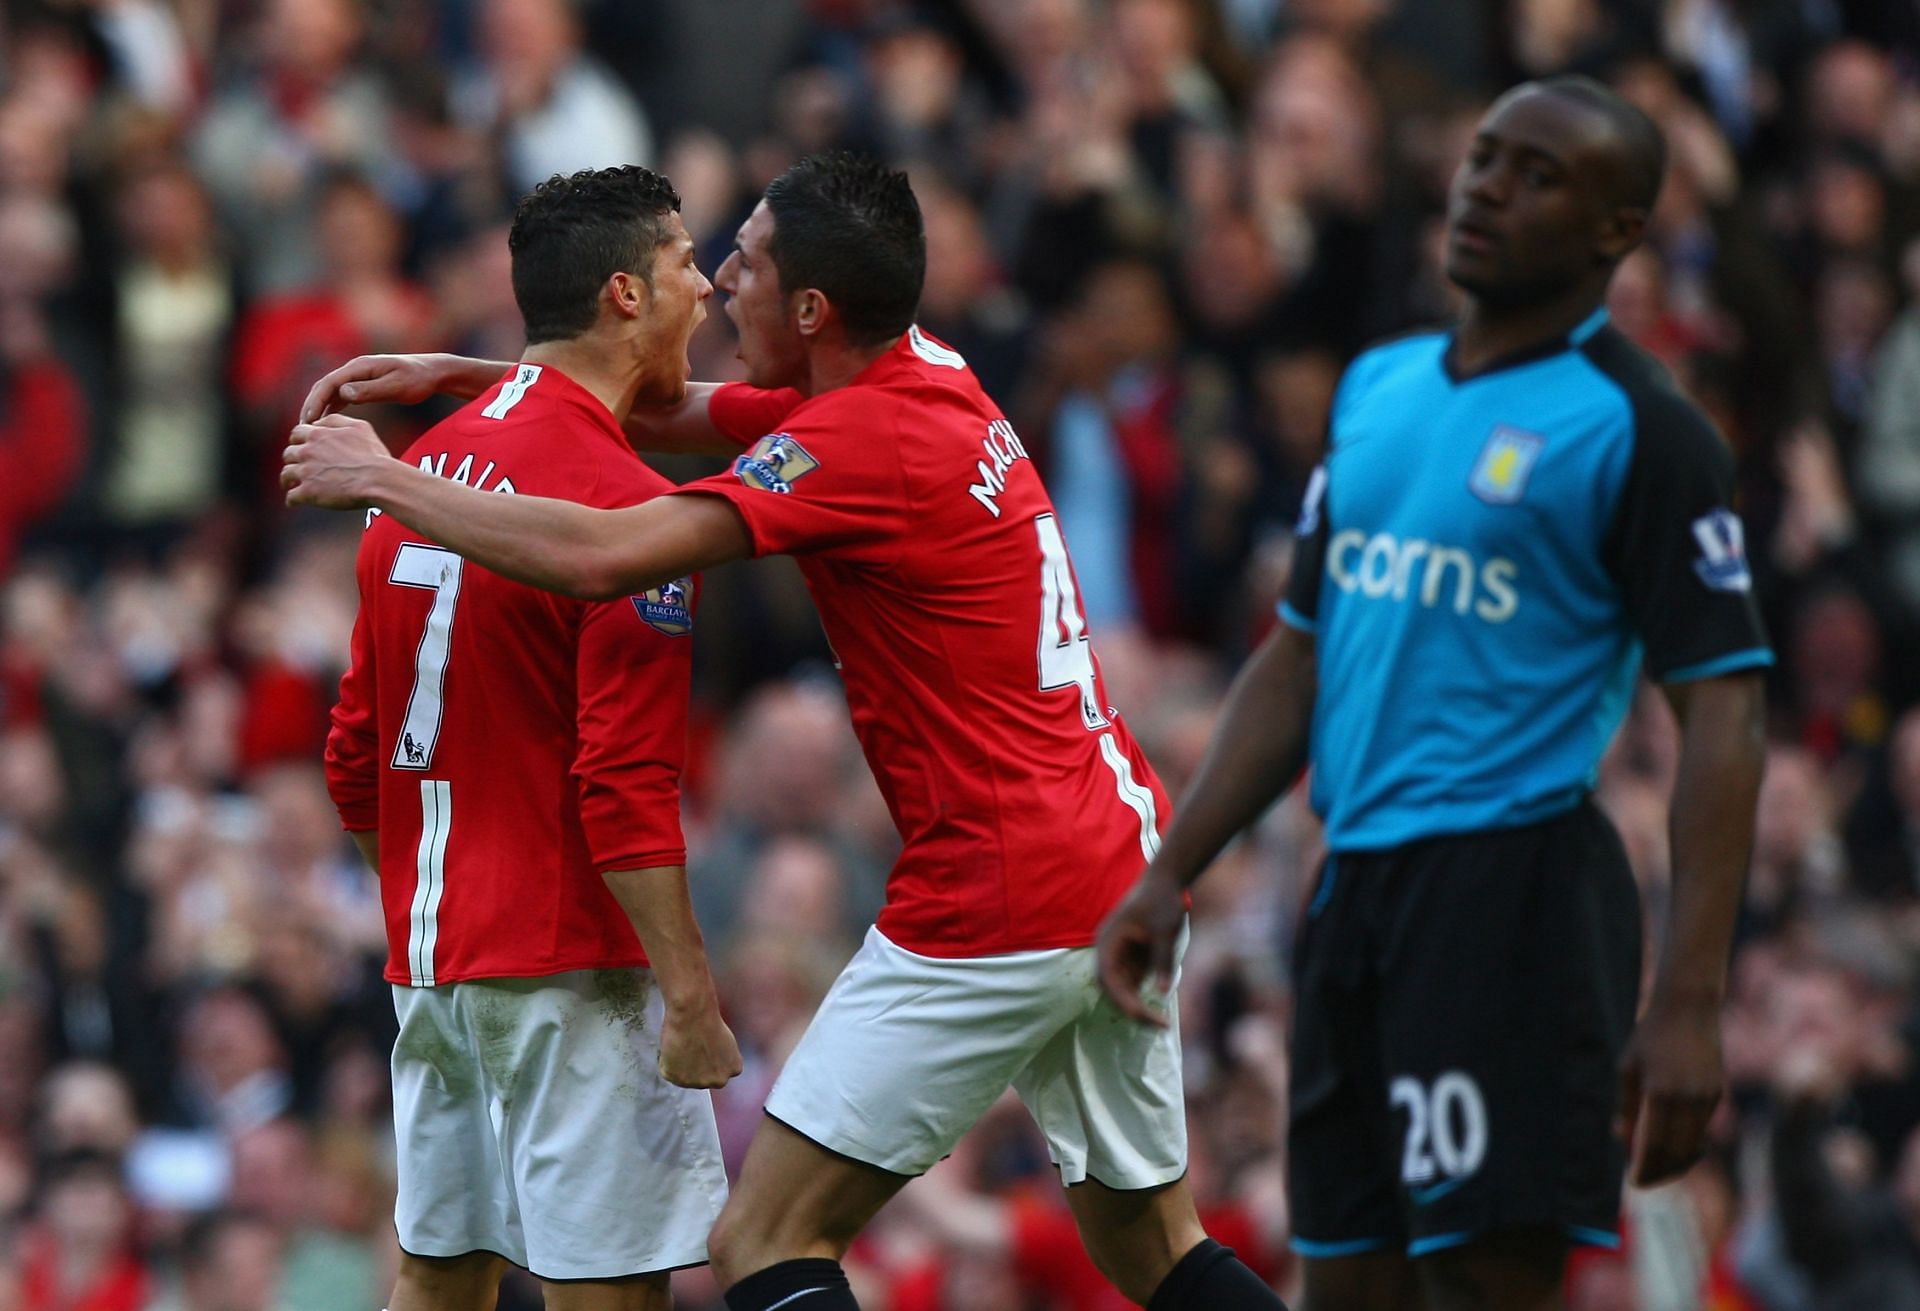 Federico Macheda and Cristiano Ronaldo in action for Manchester United